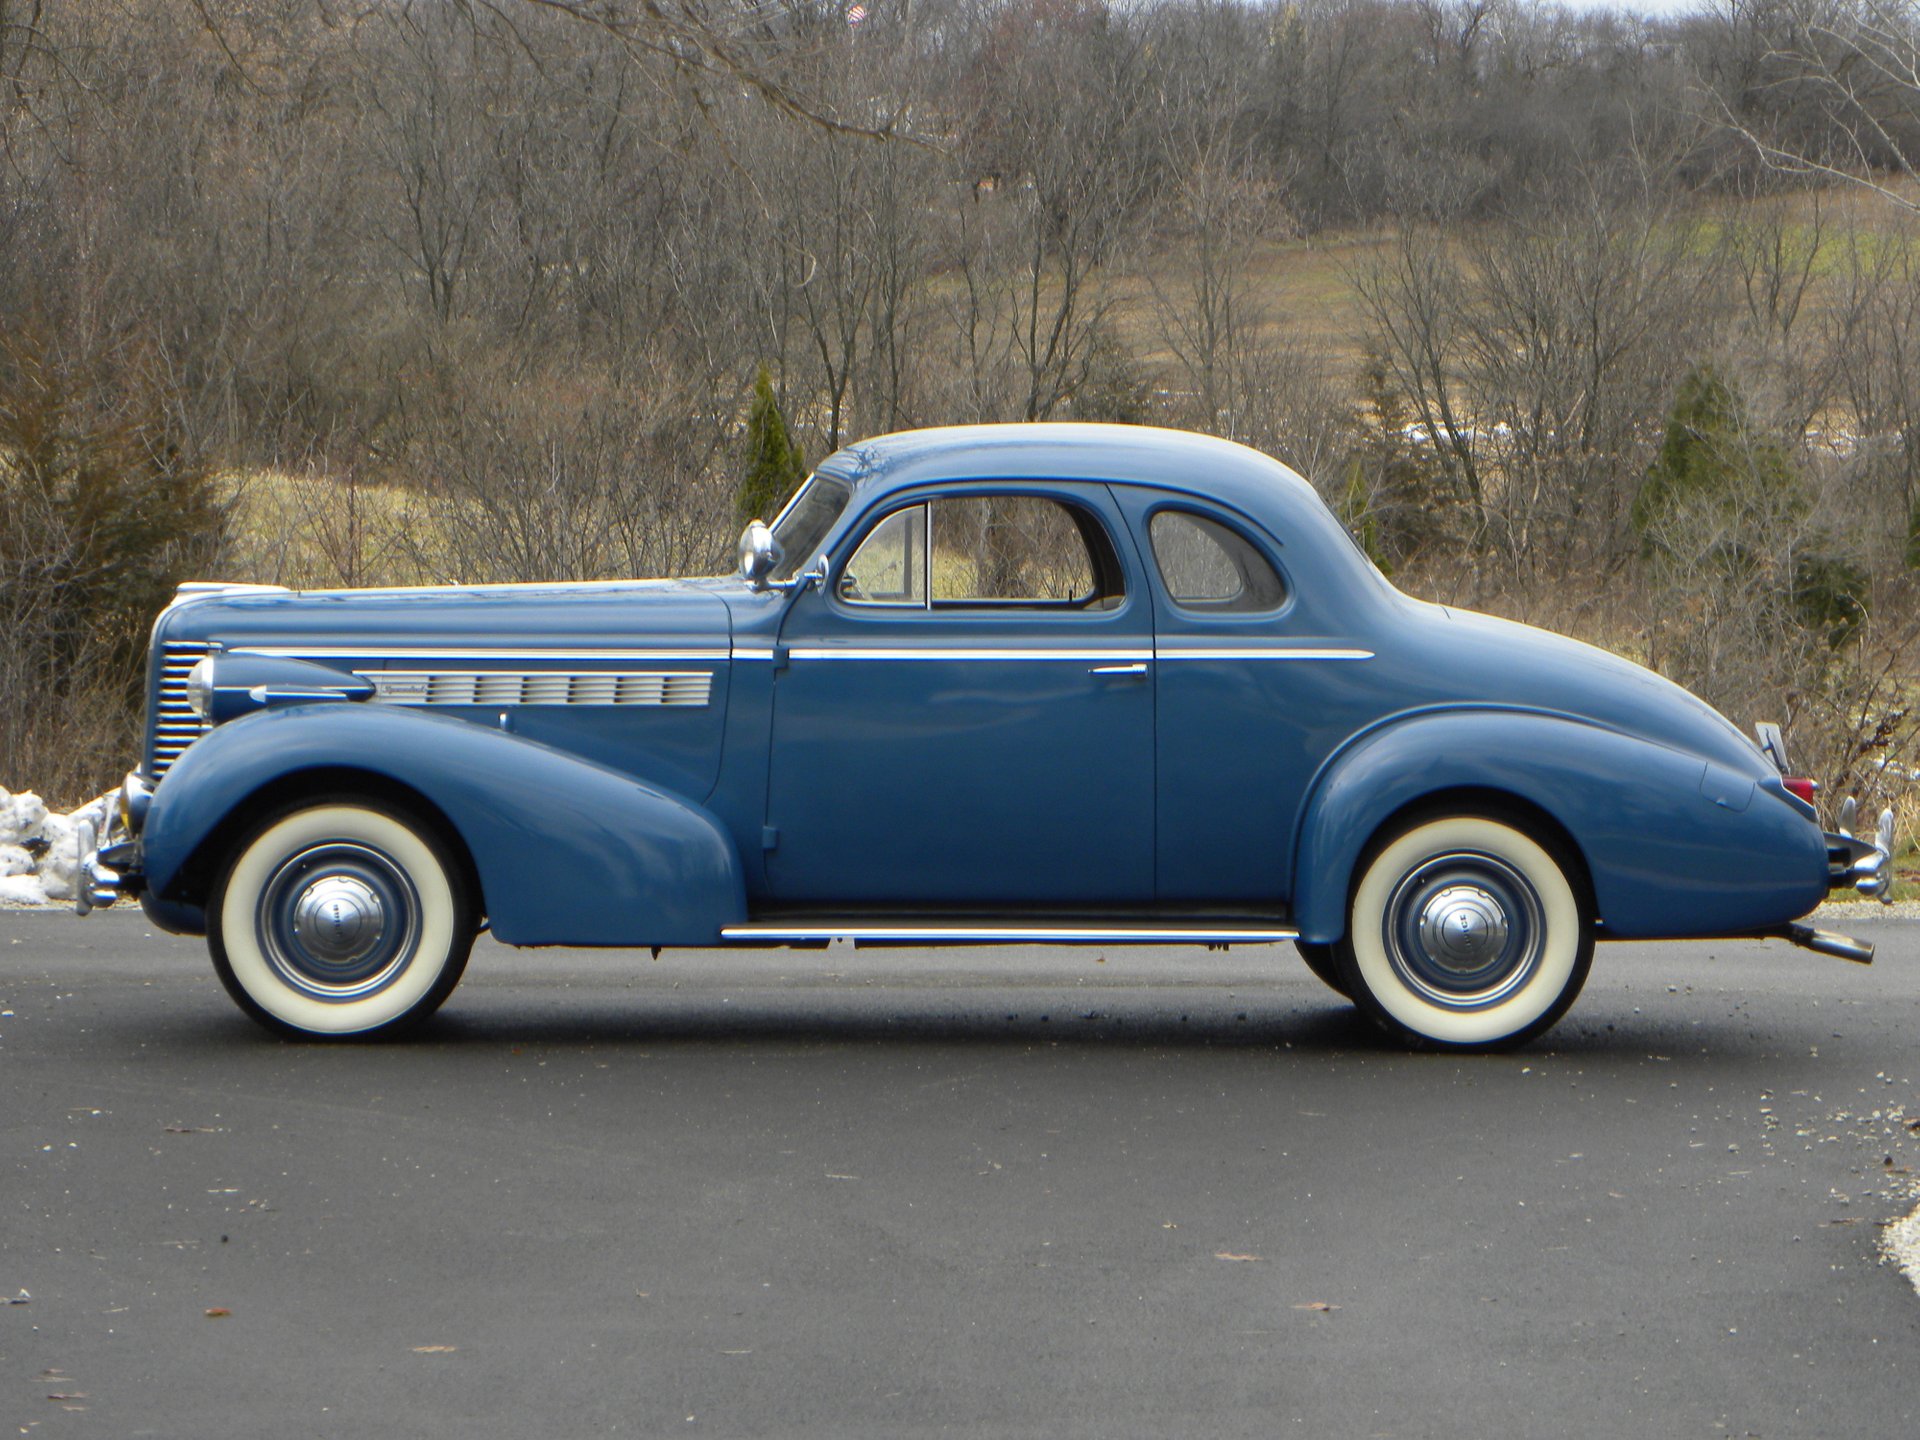 [Imagen: 1938-buick-special-series-40-business-coupe]